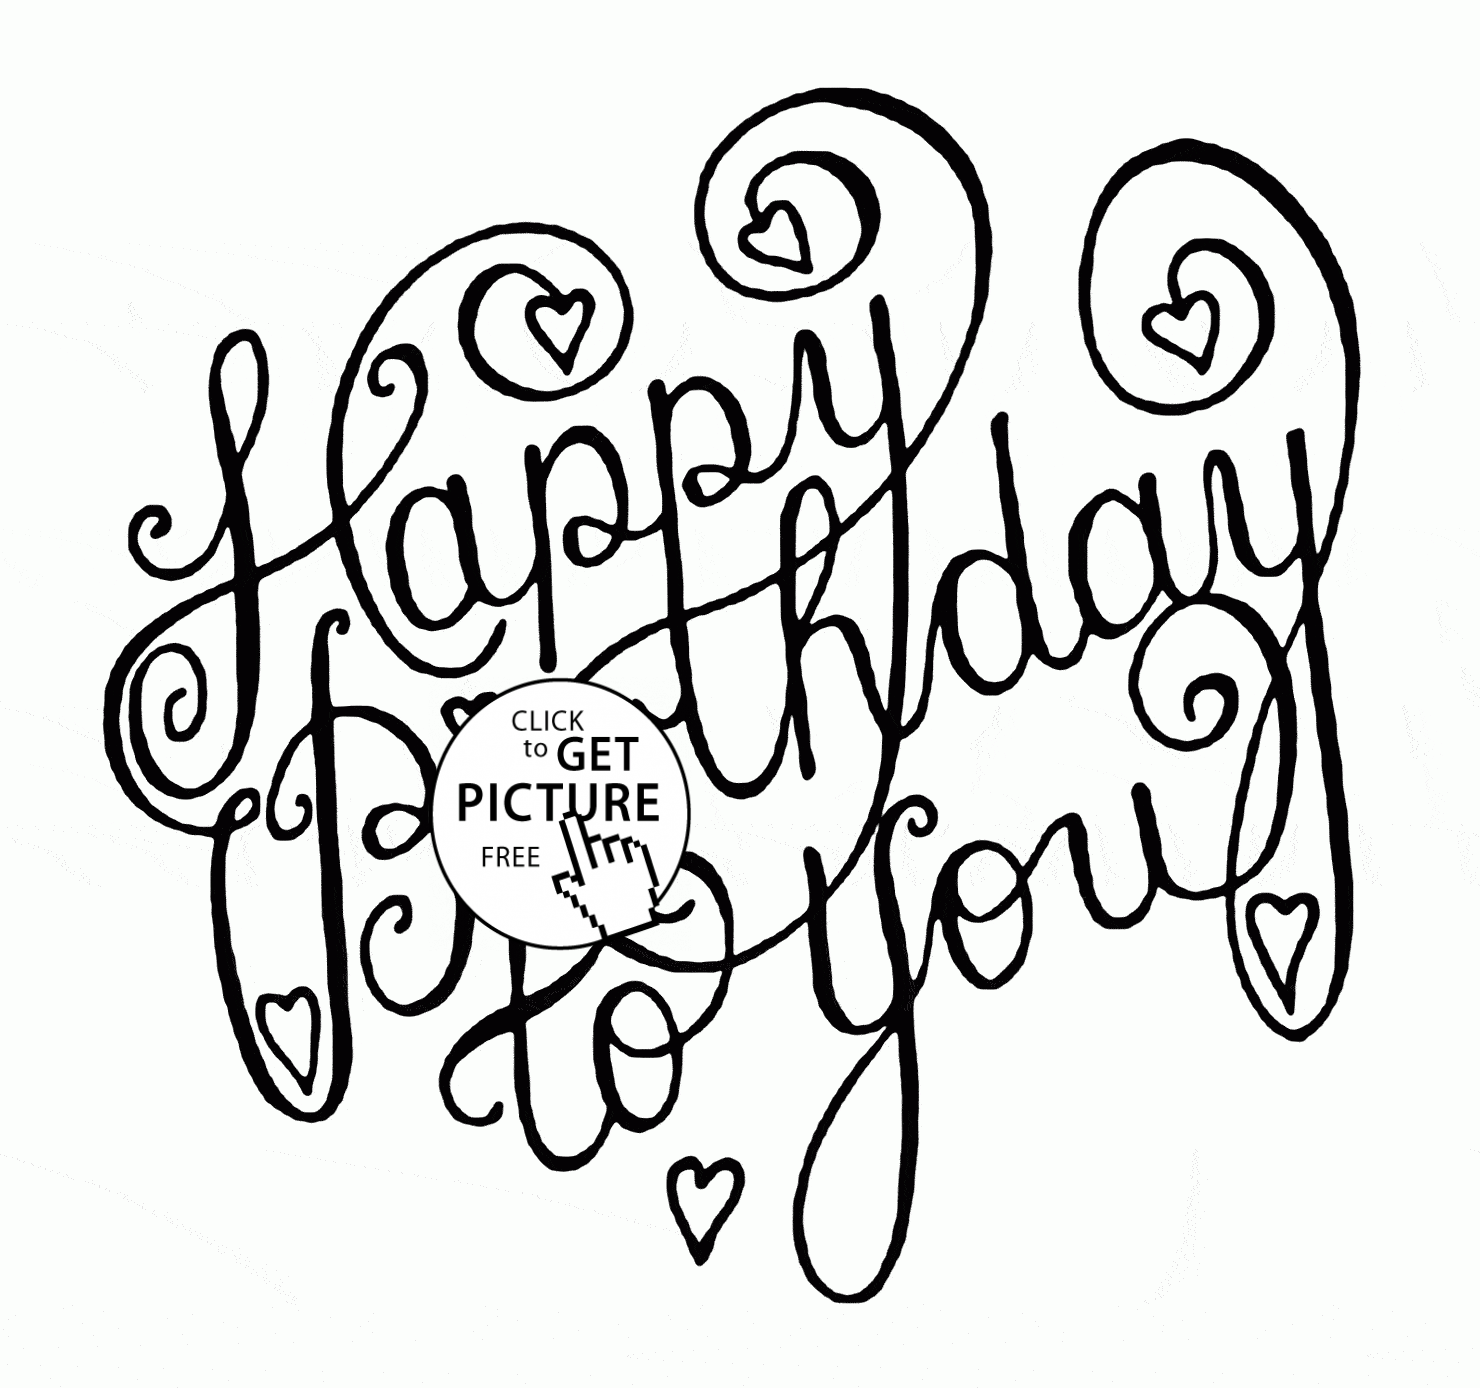 96 Cute Happy Birthday Card Printable Coloring Pages with Animal character